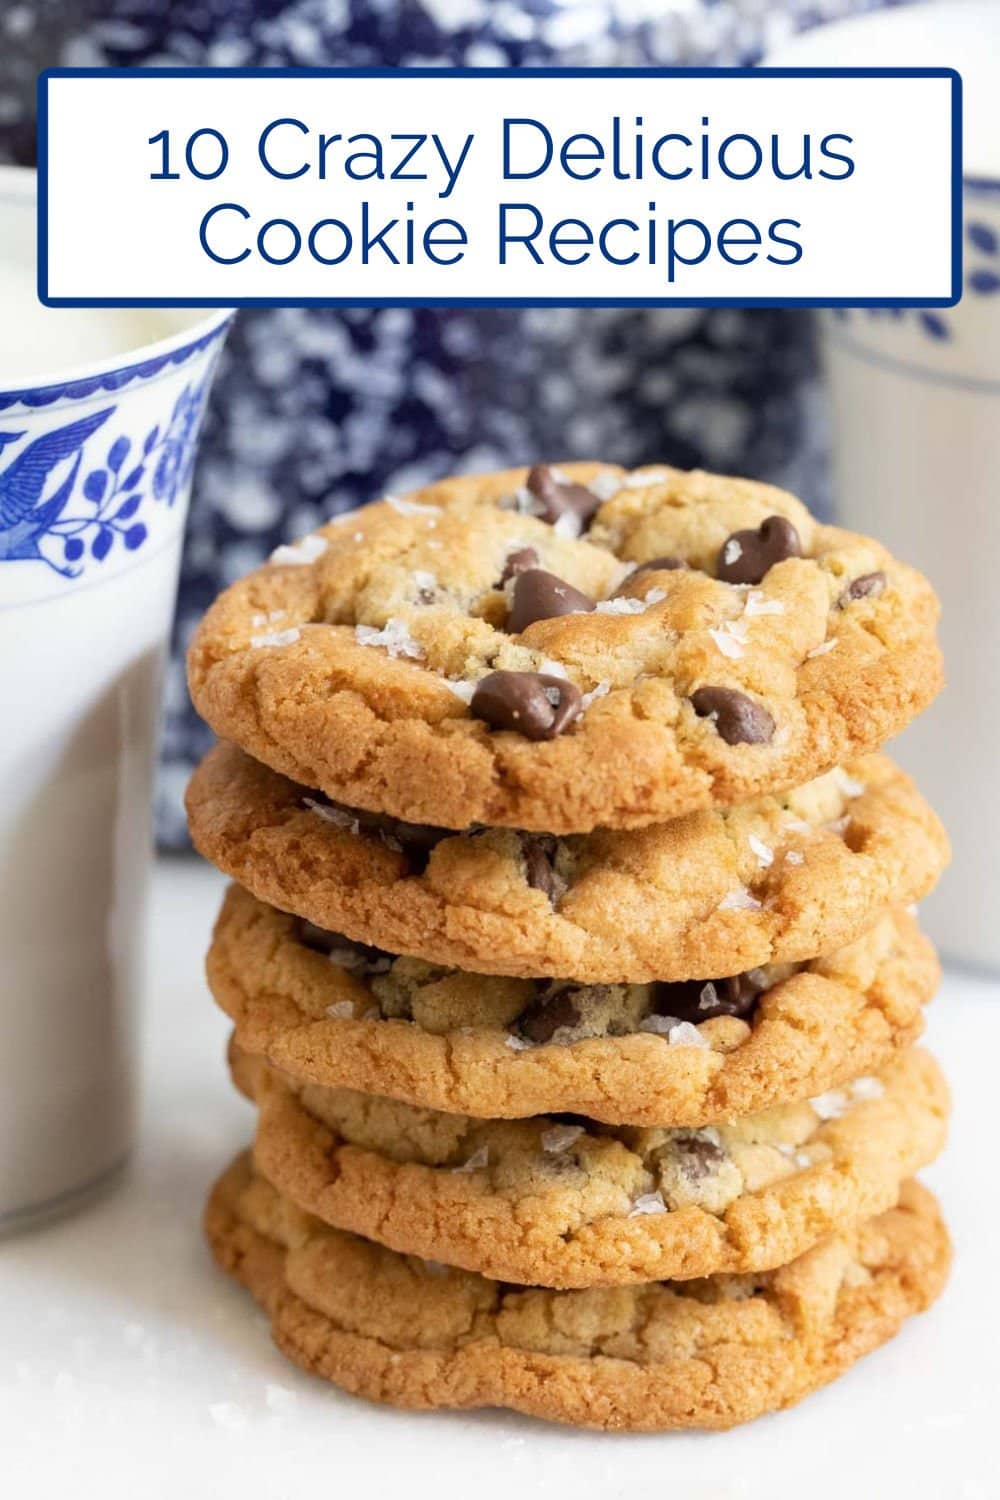 One-Bowl, No-Mixer Cookie Recipes EVERYONE Will Love!